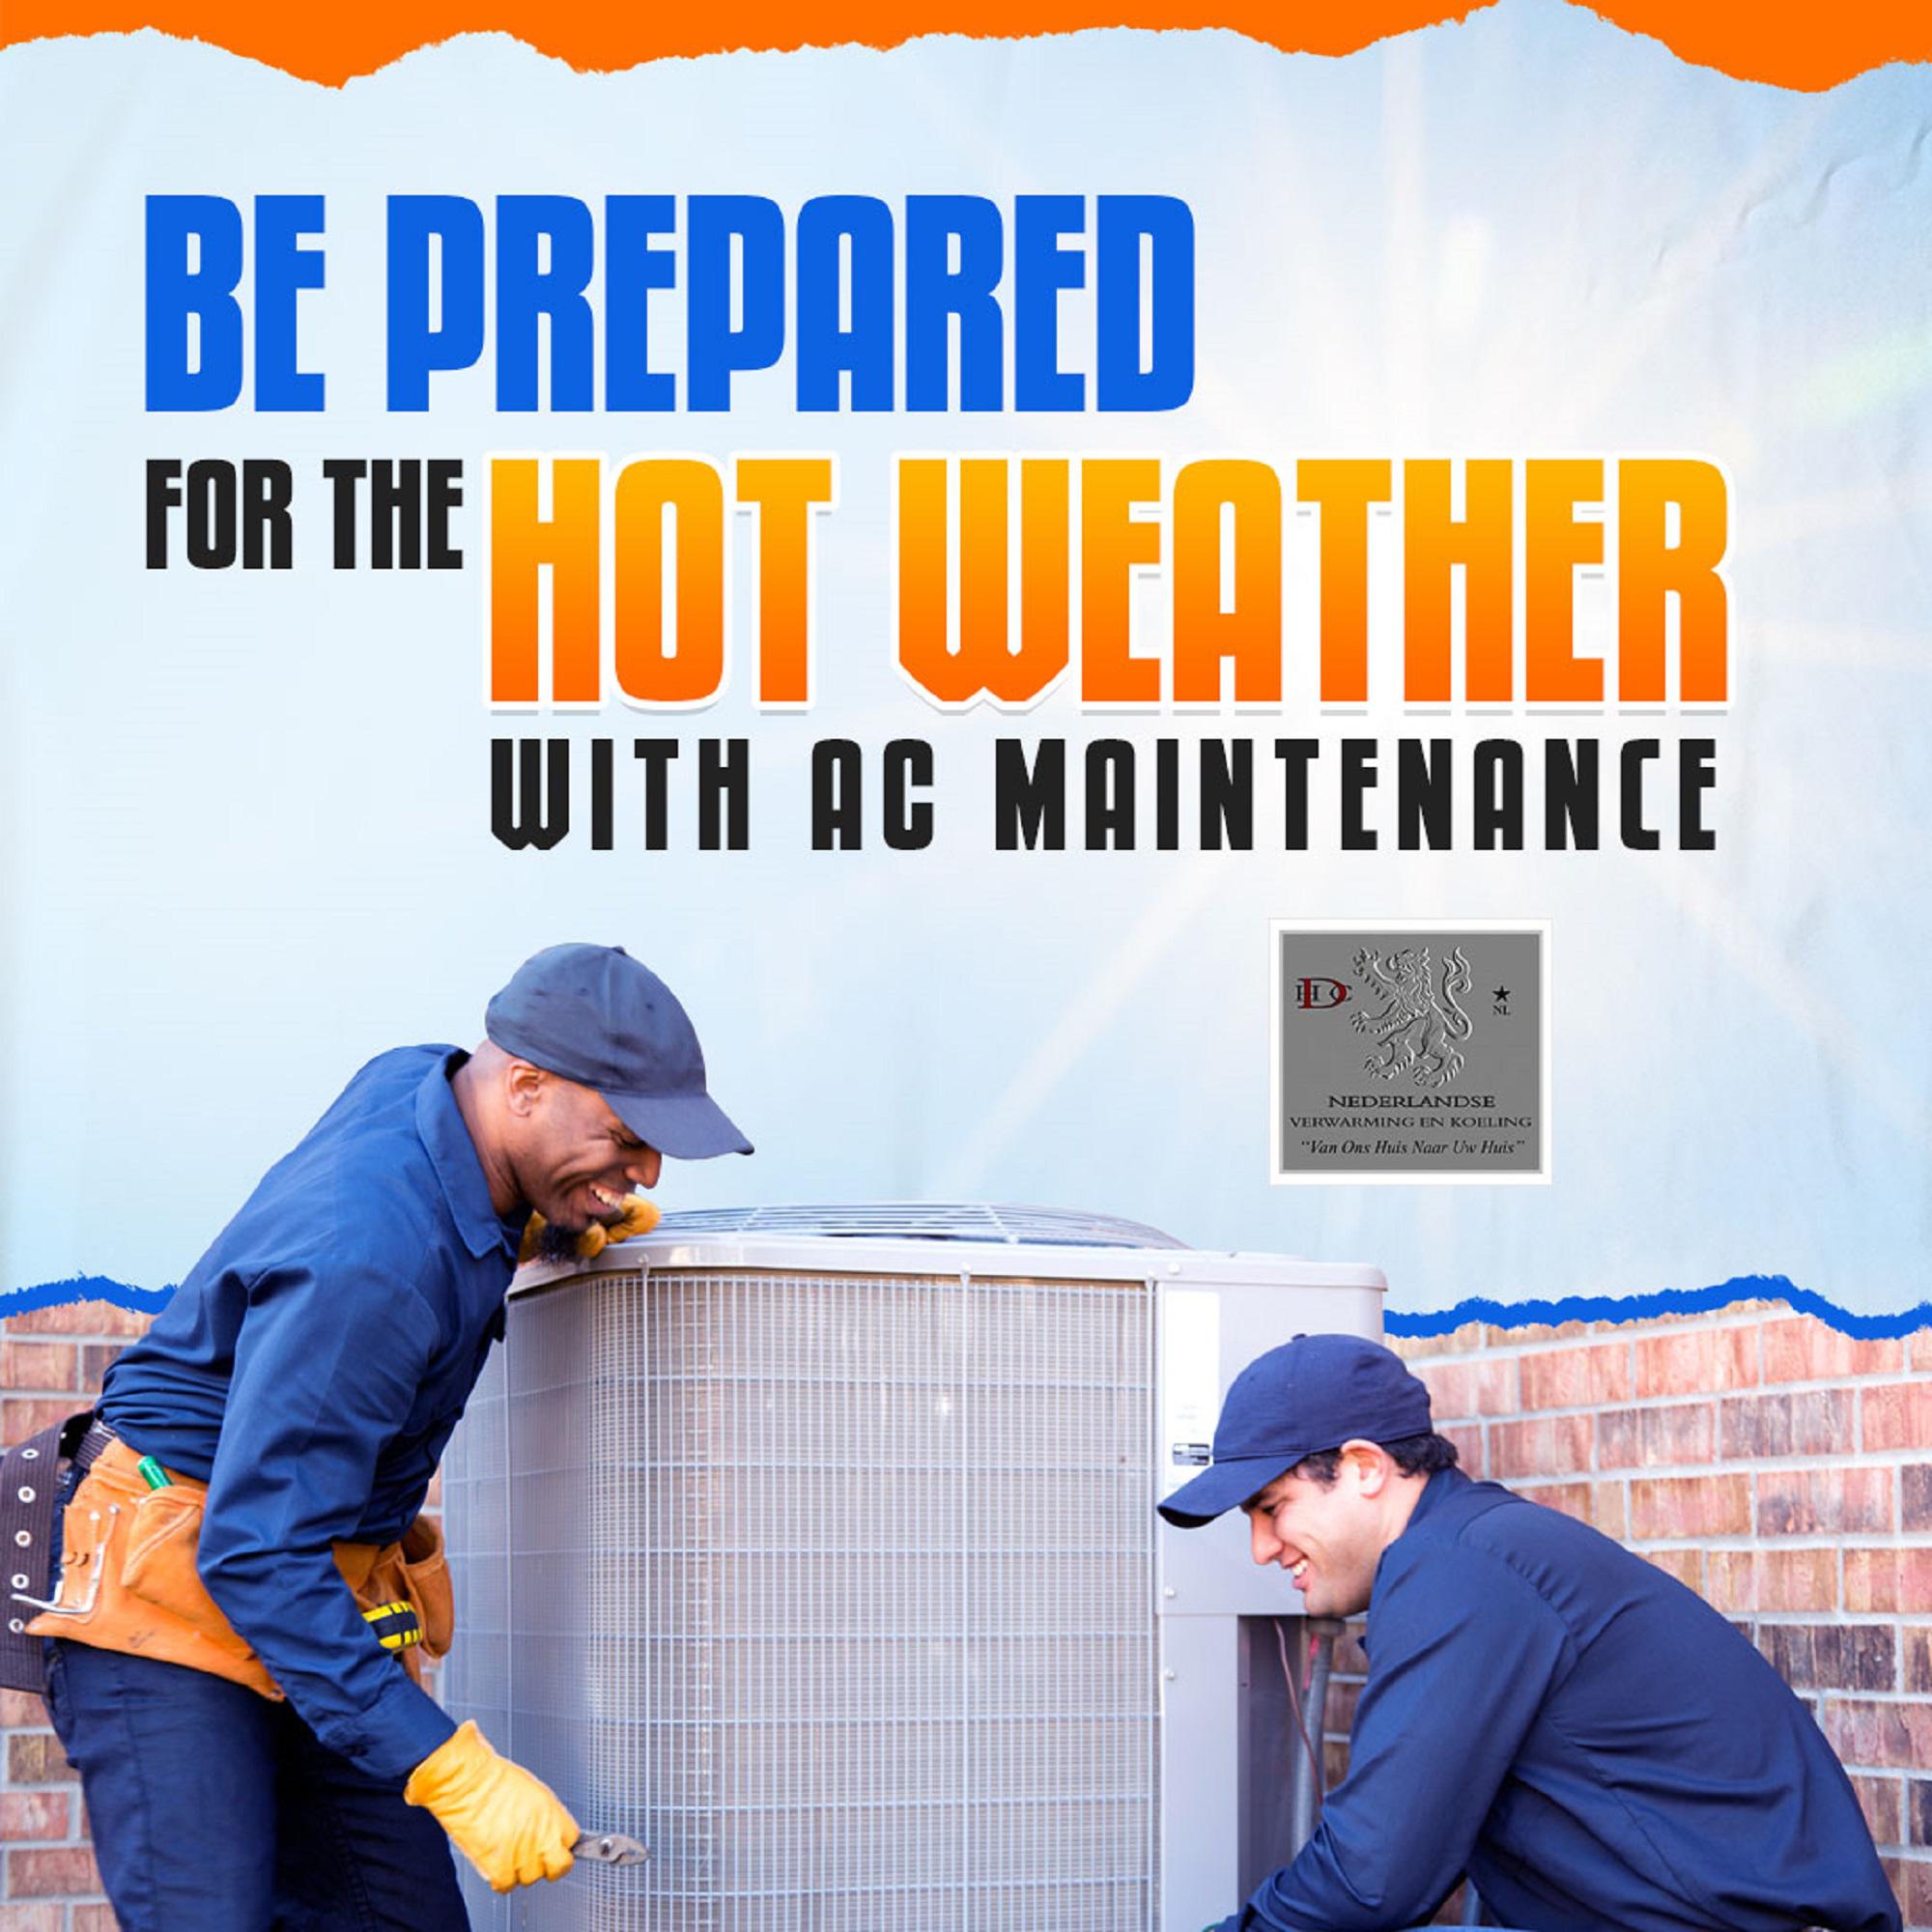 This is the season of renewal and preparation. Renew your A/C unit's performance and be prepared for the hot weather with a maintenance check-up. Book now and stay cool all summer long!